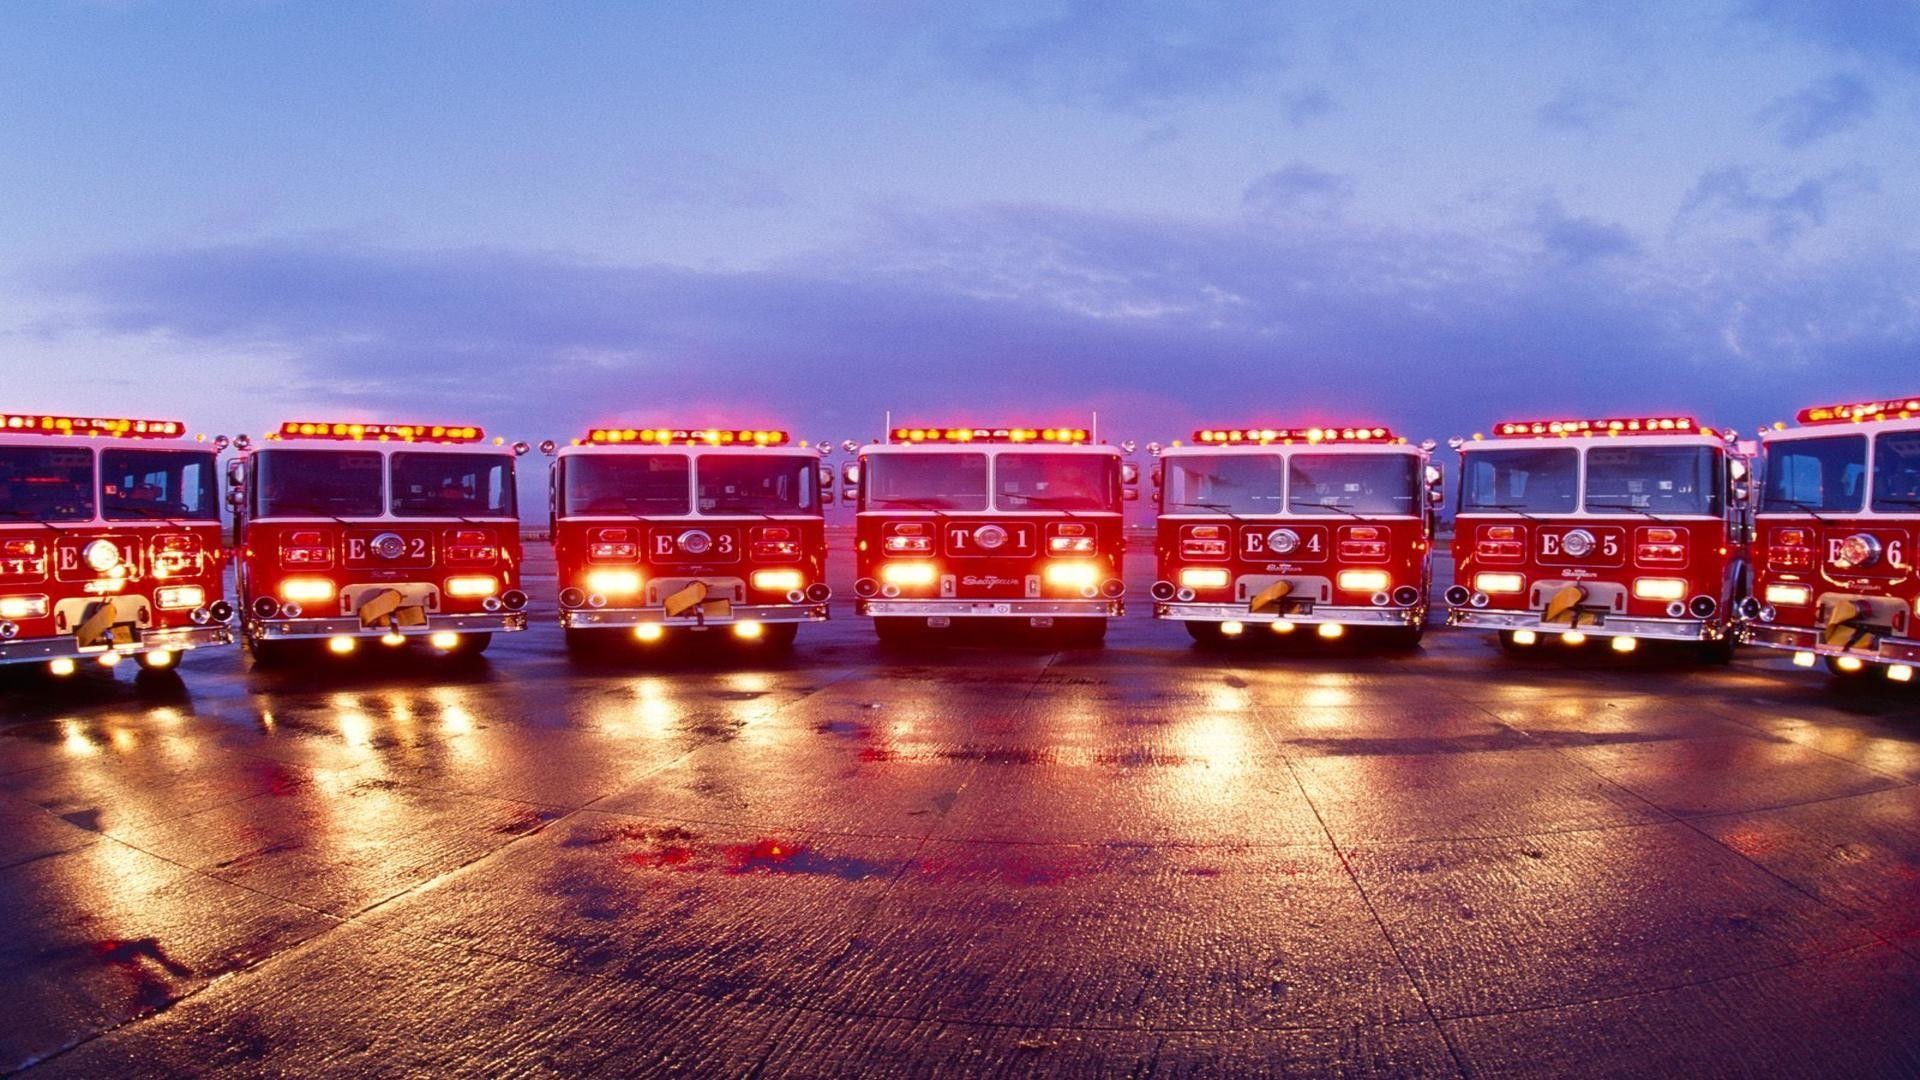 1920x1080 ... Superior Fire Truck Images HQ Definition for Laptop ...